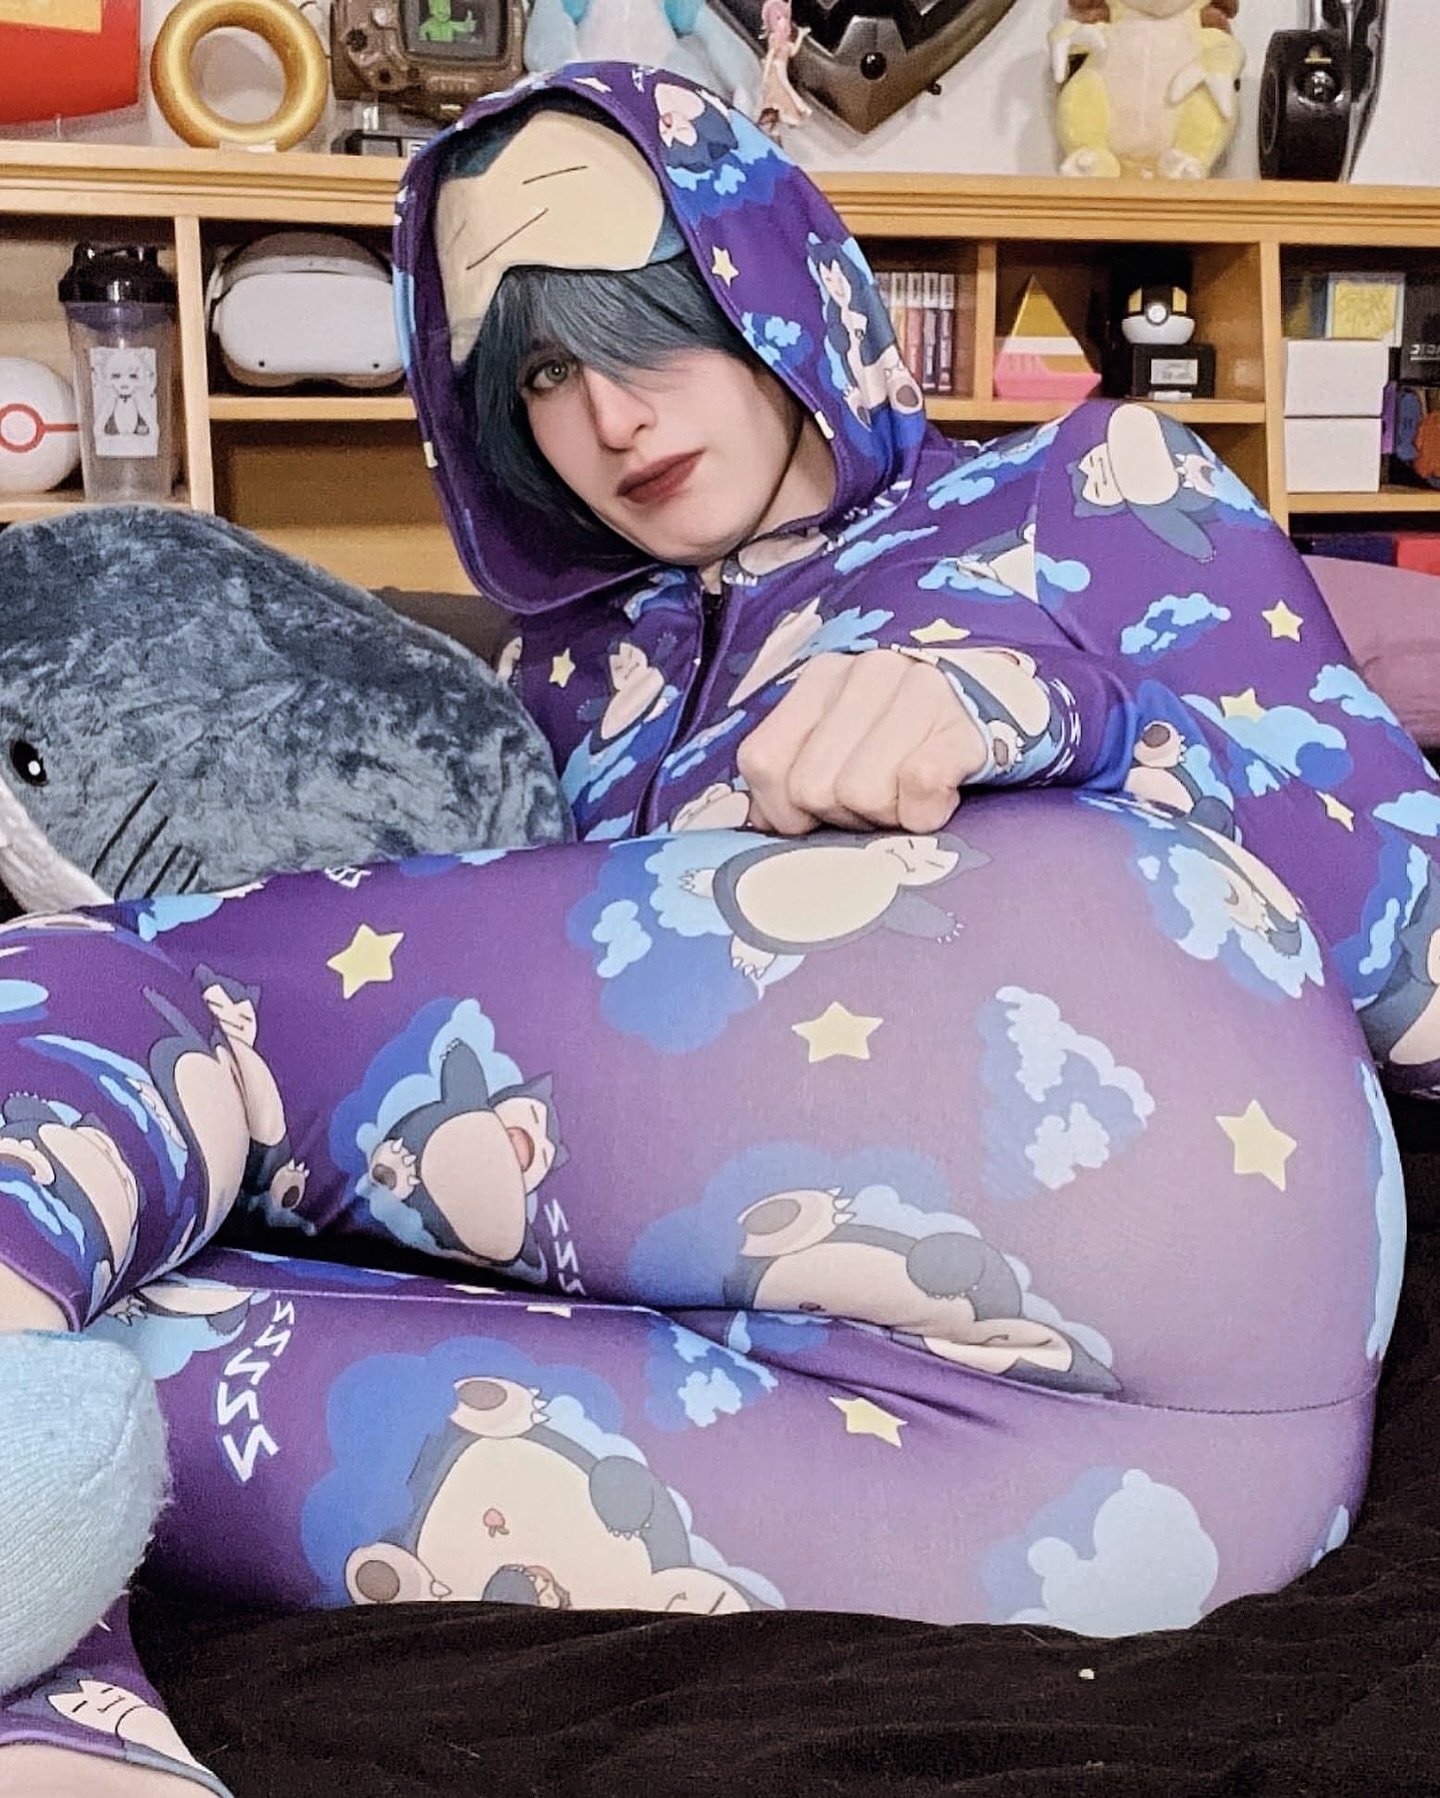 We like bears now. Snorlax is a bear right? These are my favorite pajamas. Are you a fan? What do you wear to bed? Leave your answer in the comments below.  Outfit from: @blackmilkclothing ♡♡♡♡♡♡♡♡♡♡♡♡ Tags: #snorlax #pokemon #androgynous #bear #thick #blackmilkclothing #pajamas #cozy #lgbtq🌈 #cute #fem #cuddly #pokemonpajamas #bodysuit